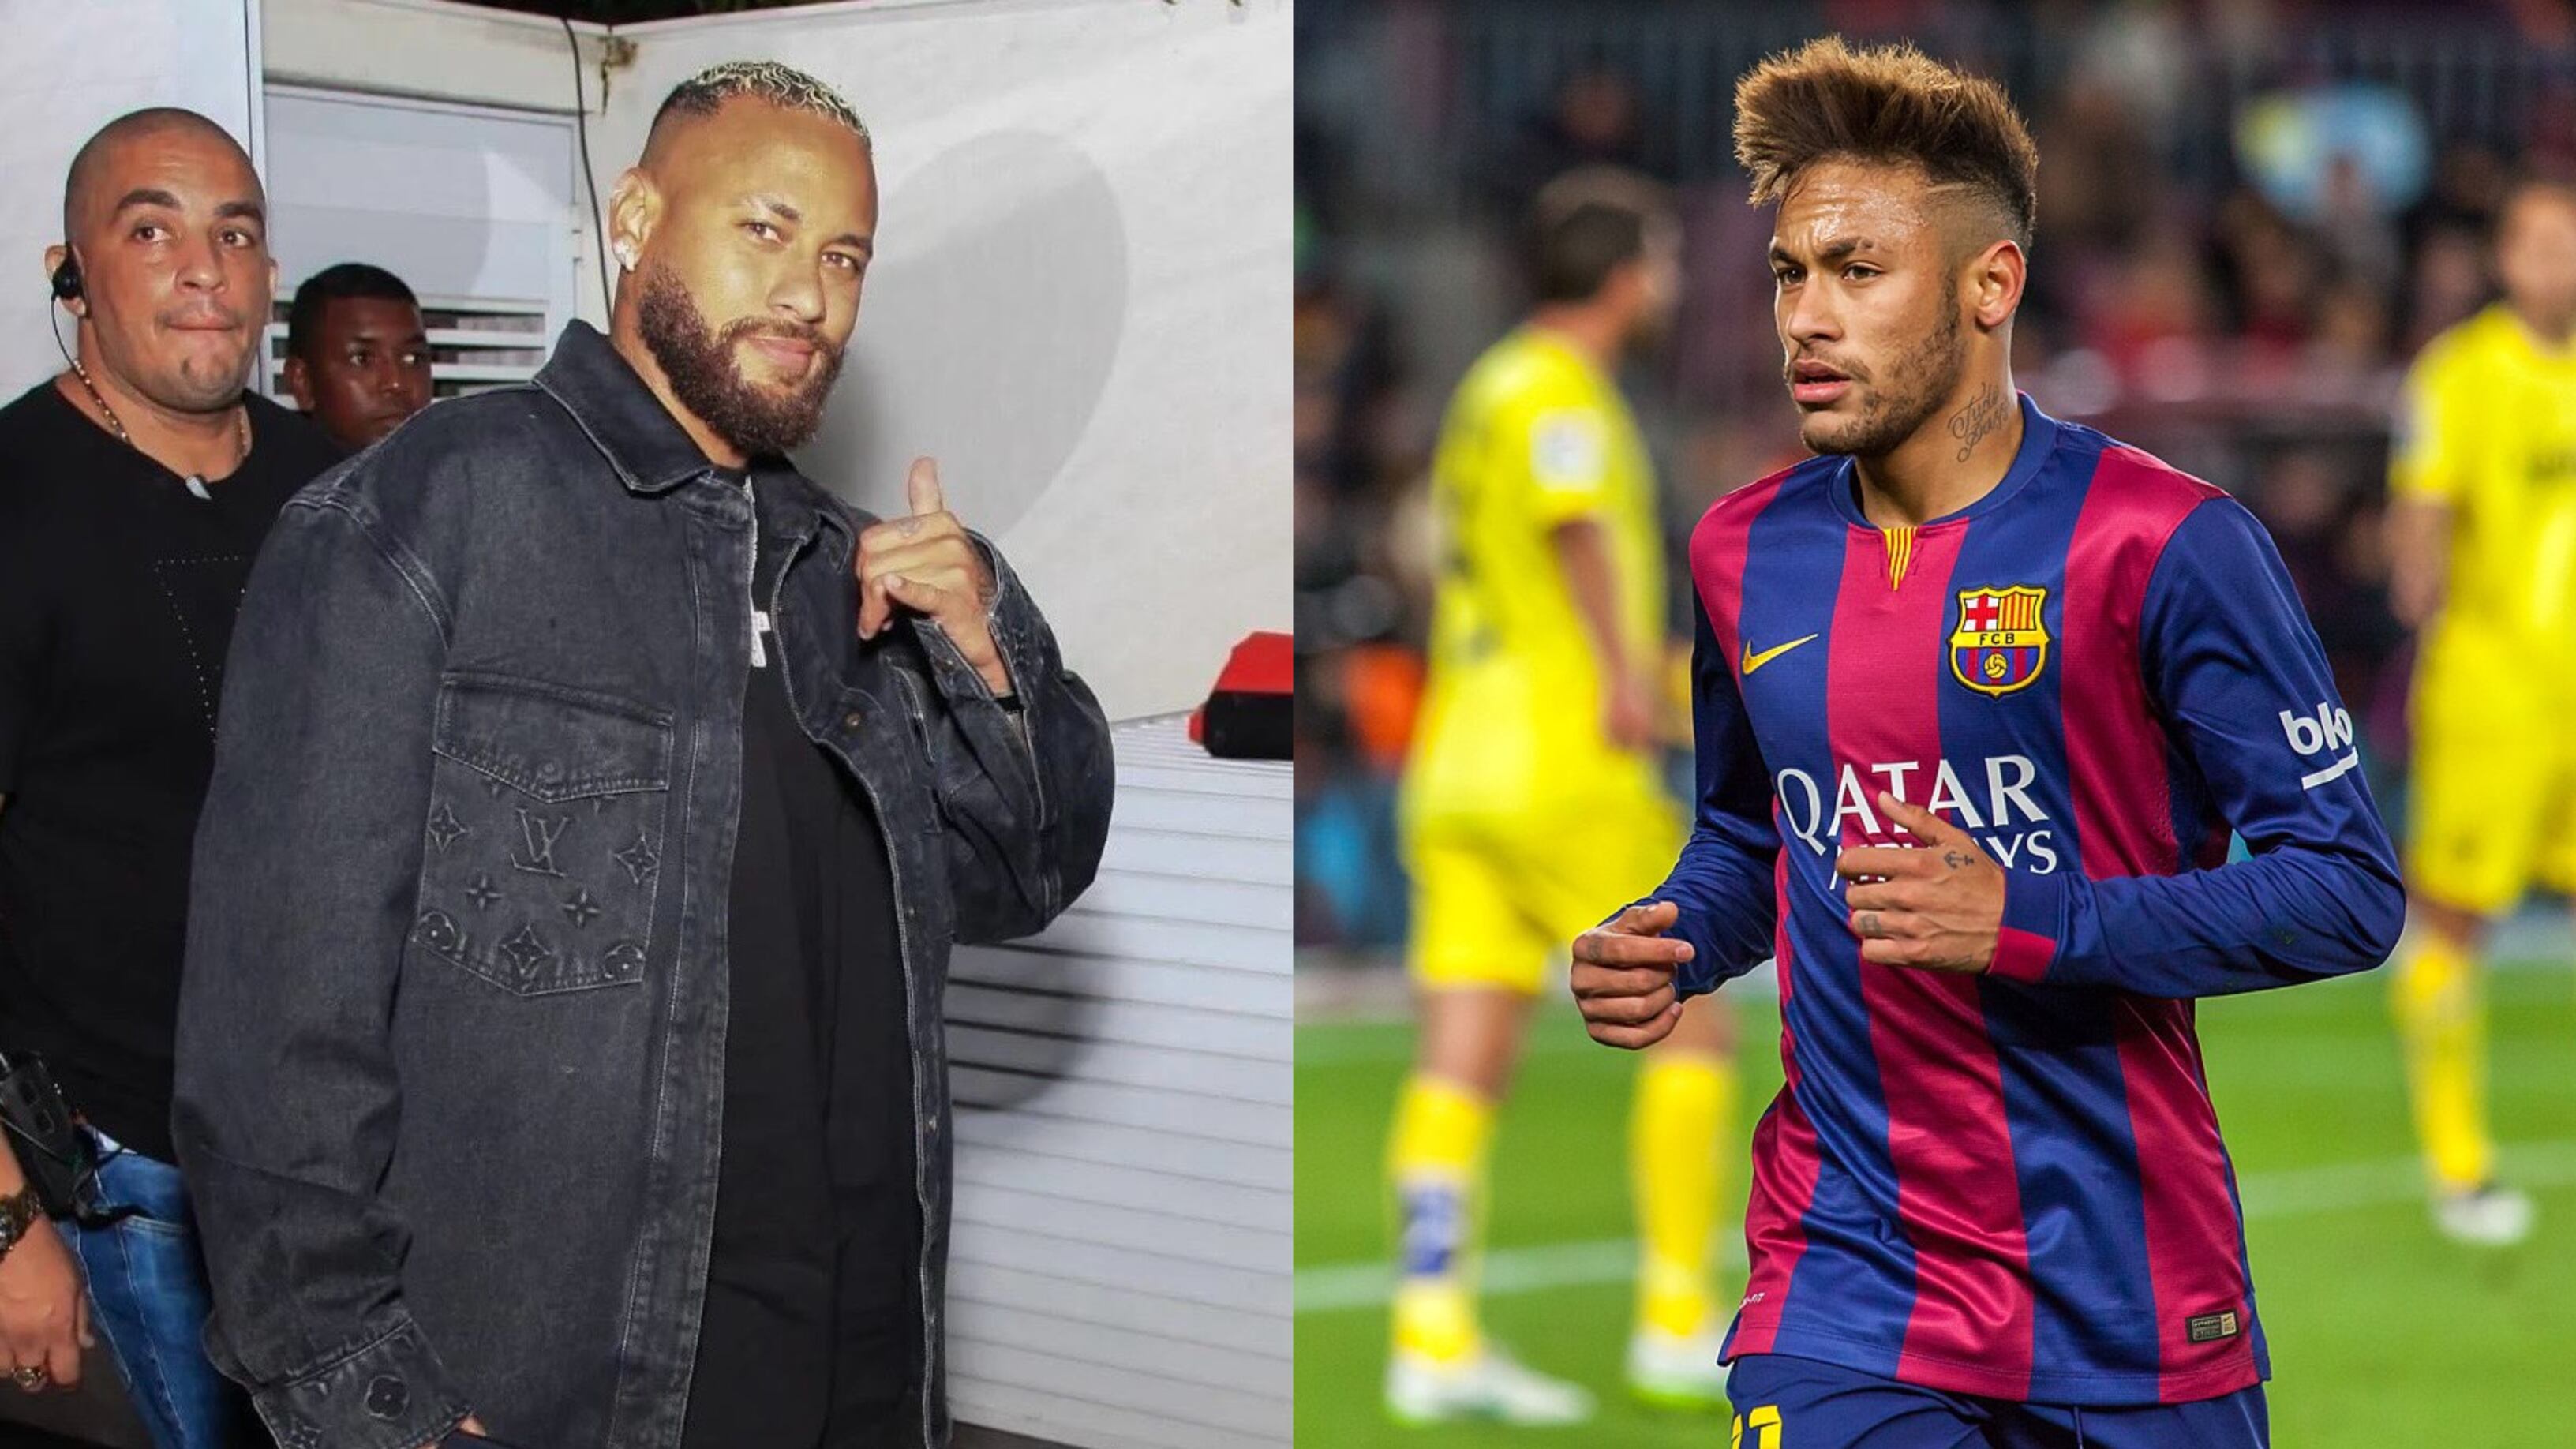 Neymar's worrying physical change: he no longer looks like a soccer player